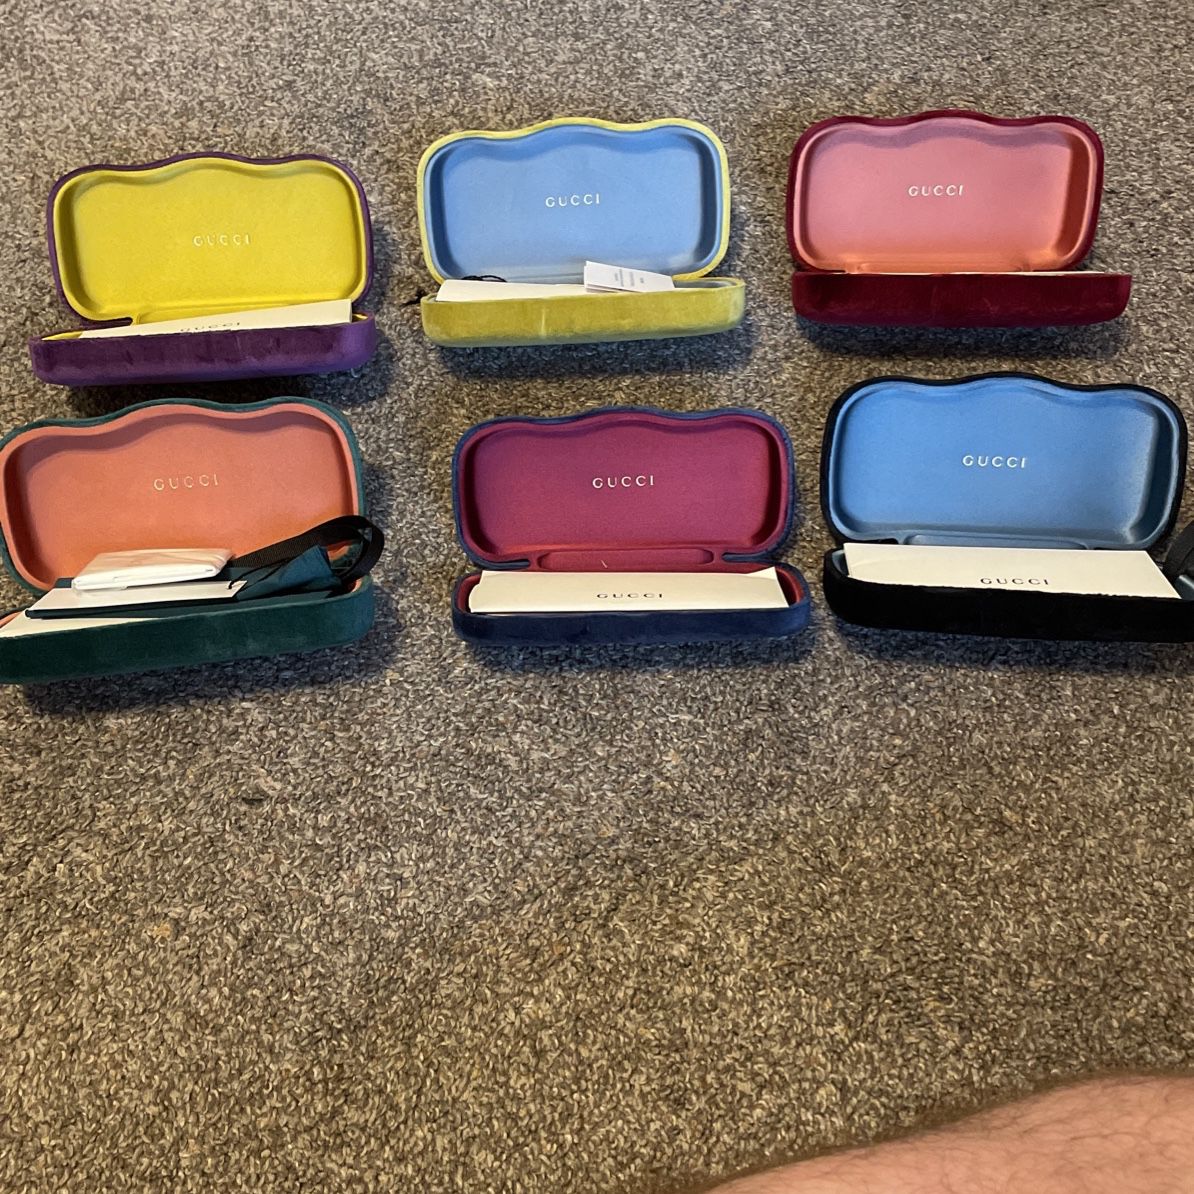 Gucci Eyewear Cases. All Colors. 